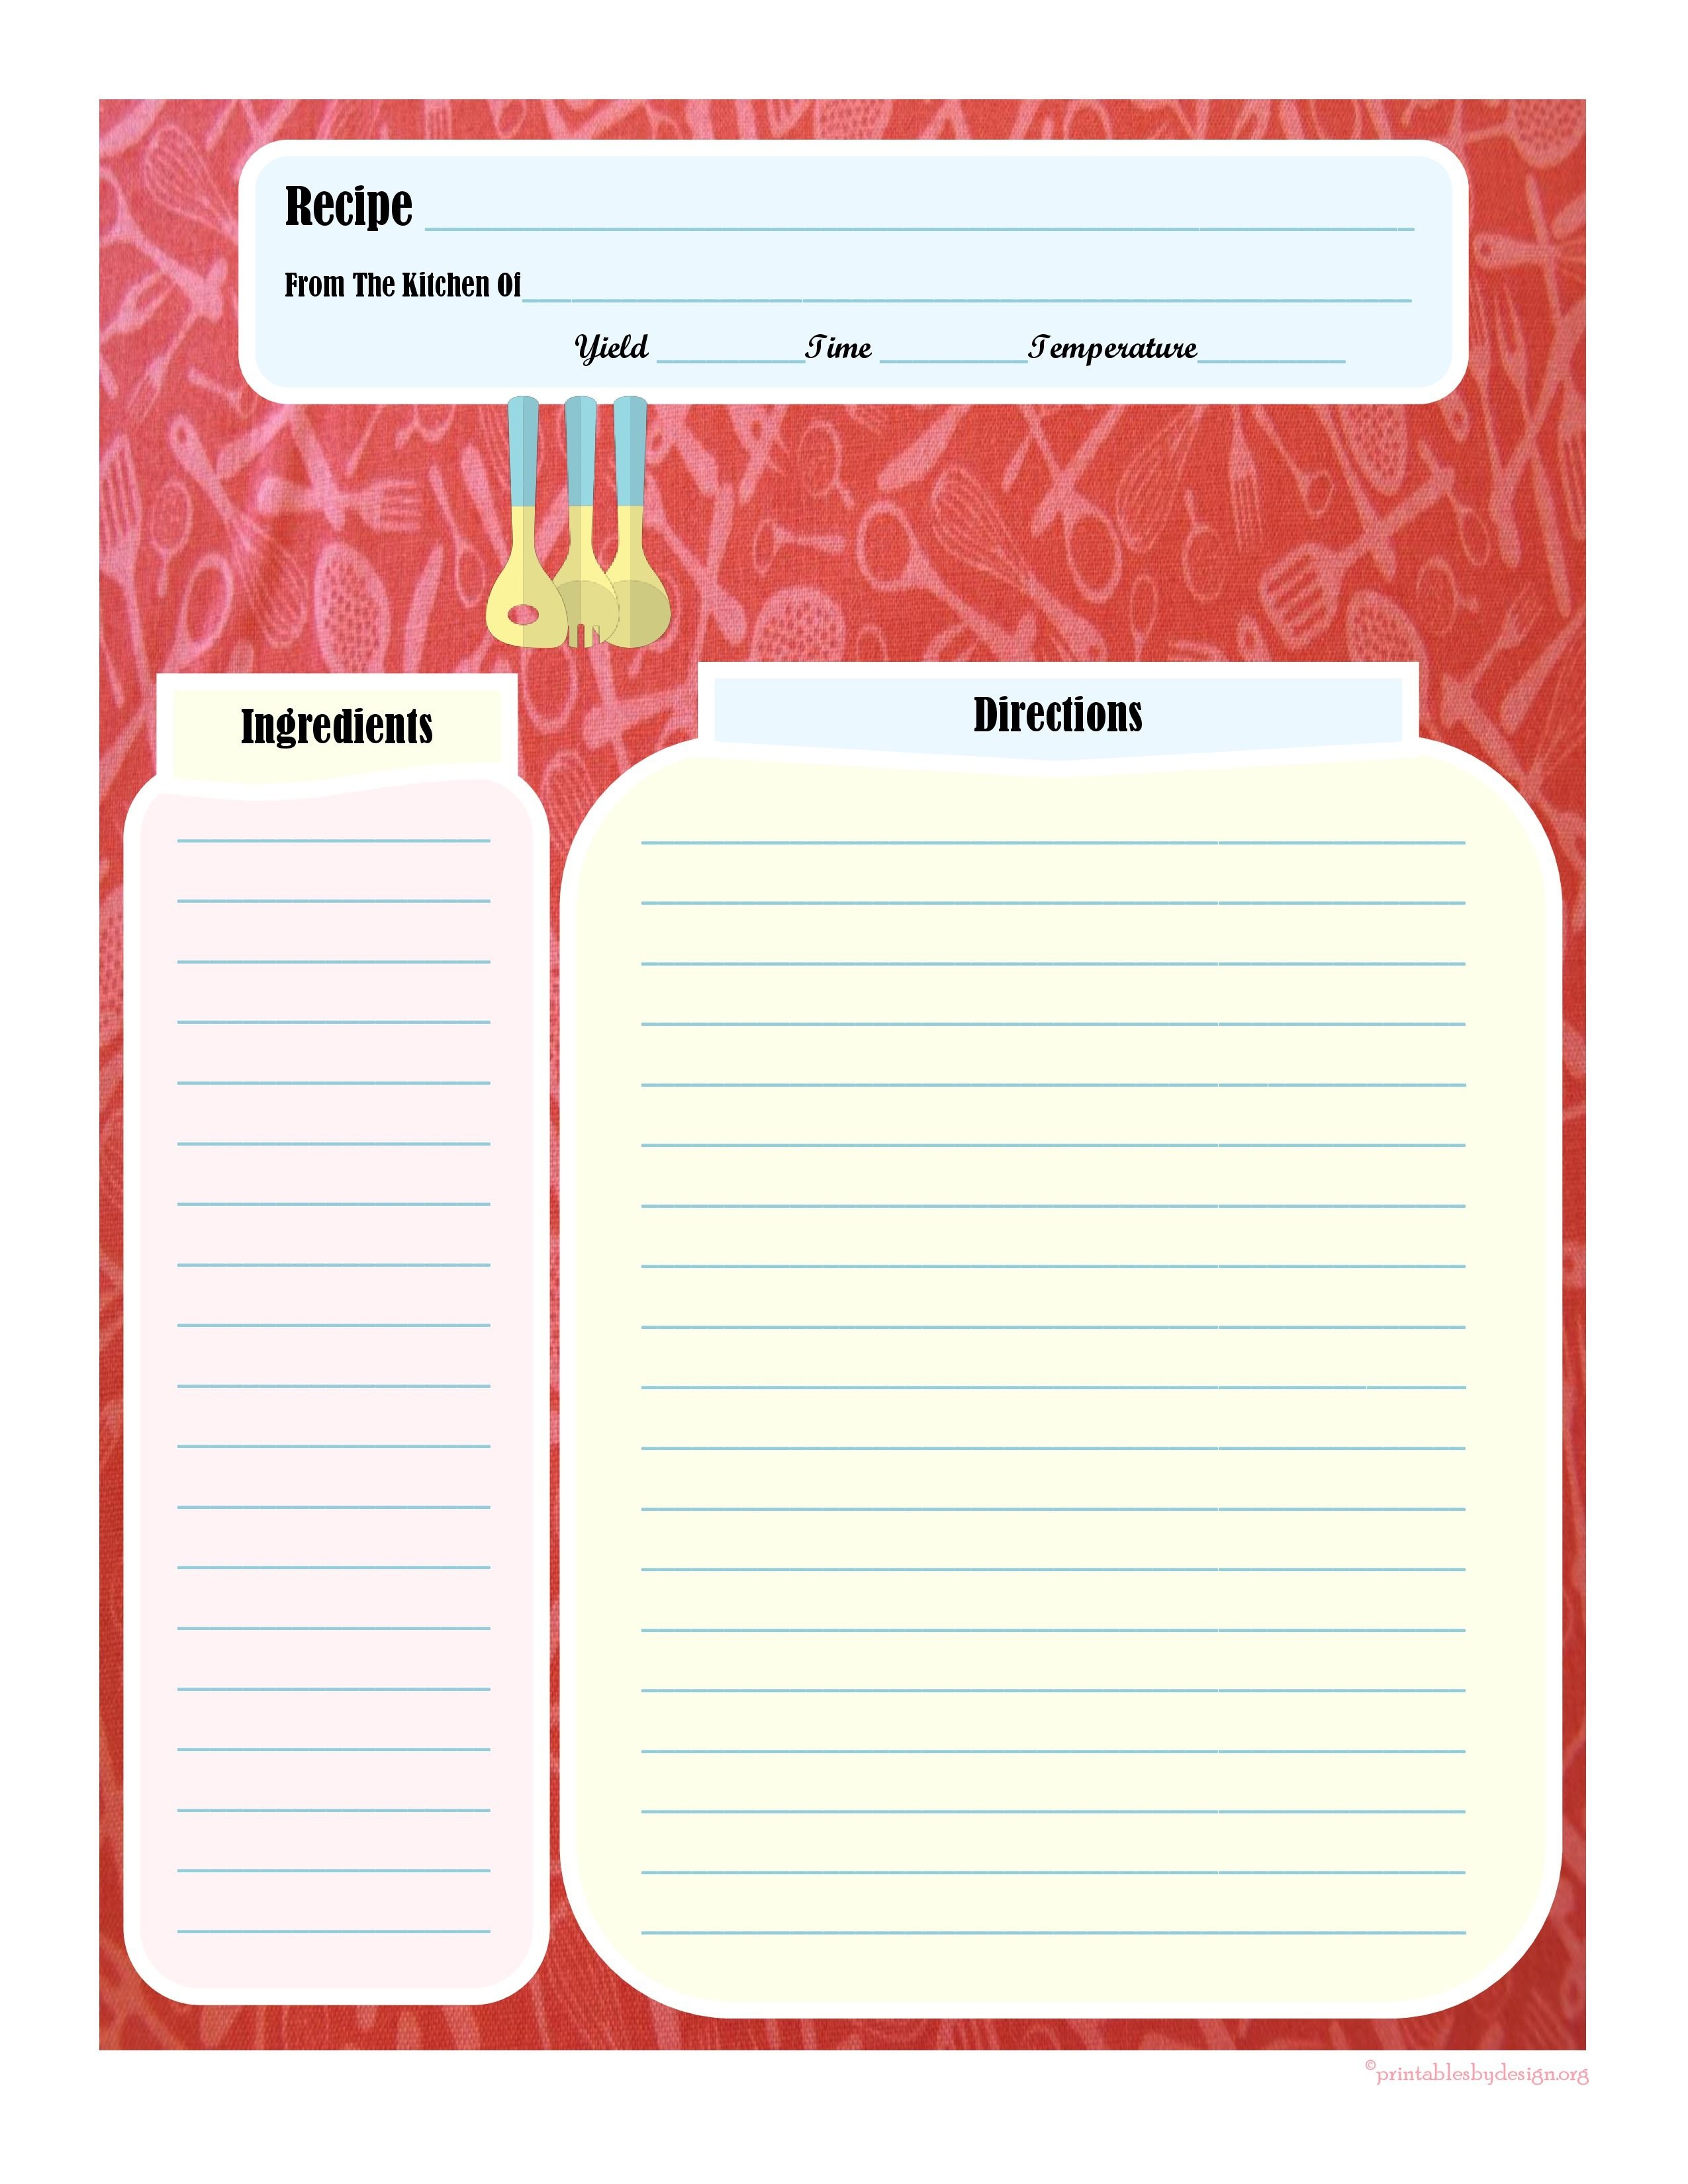 Full Page Recipe Card | Printable Recipe Cards | Printable Recipe - Free Printable Recipe Book Pages